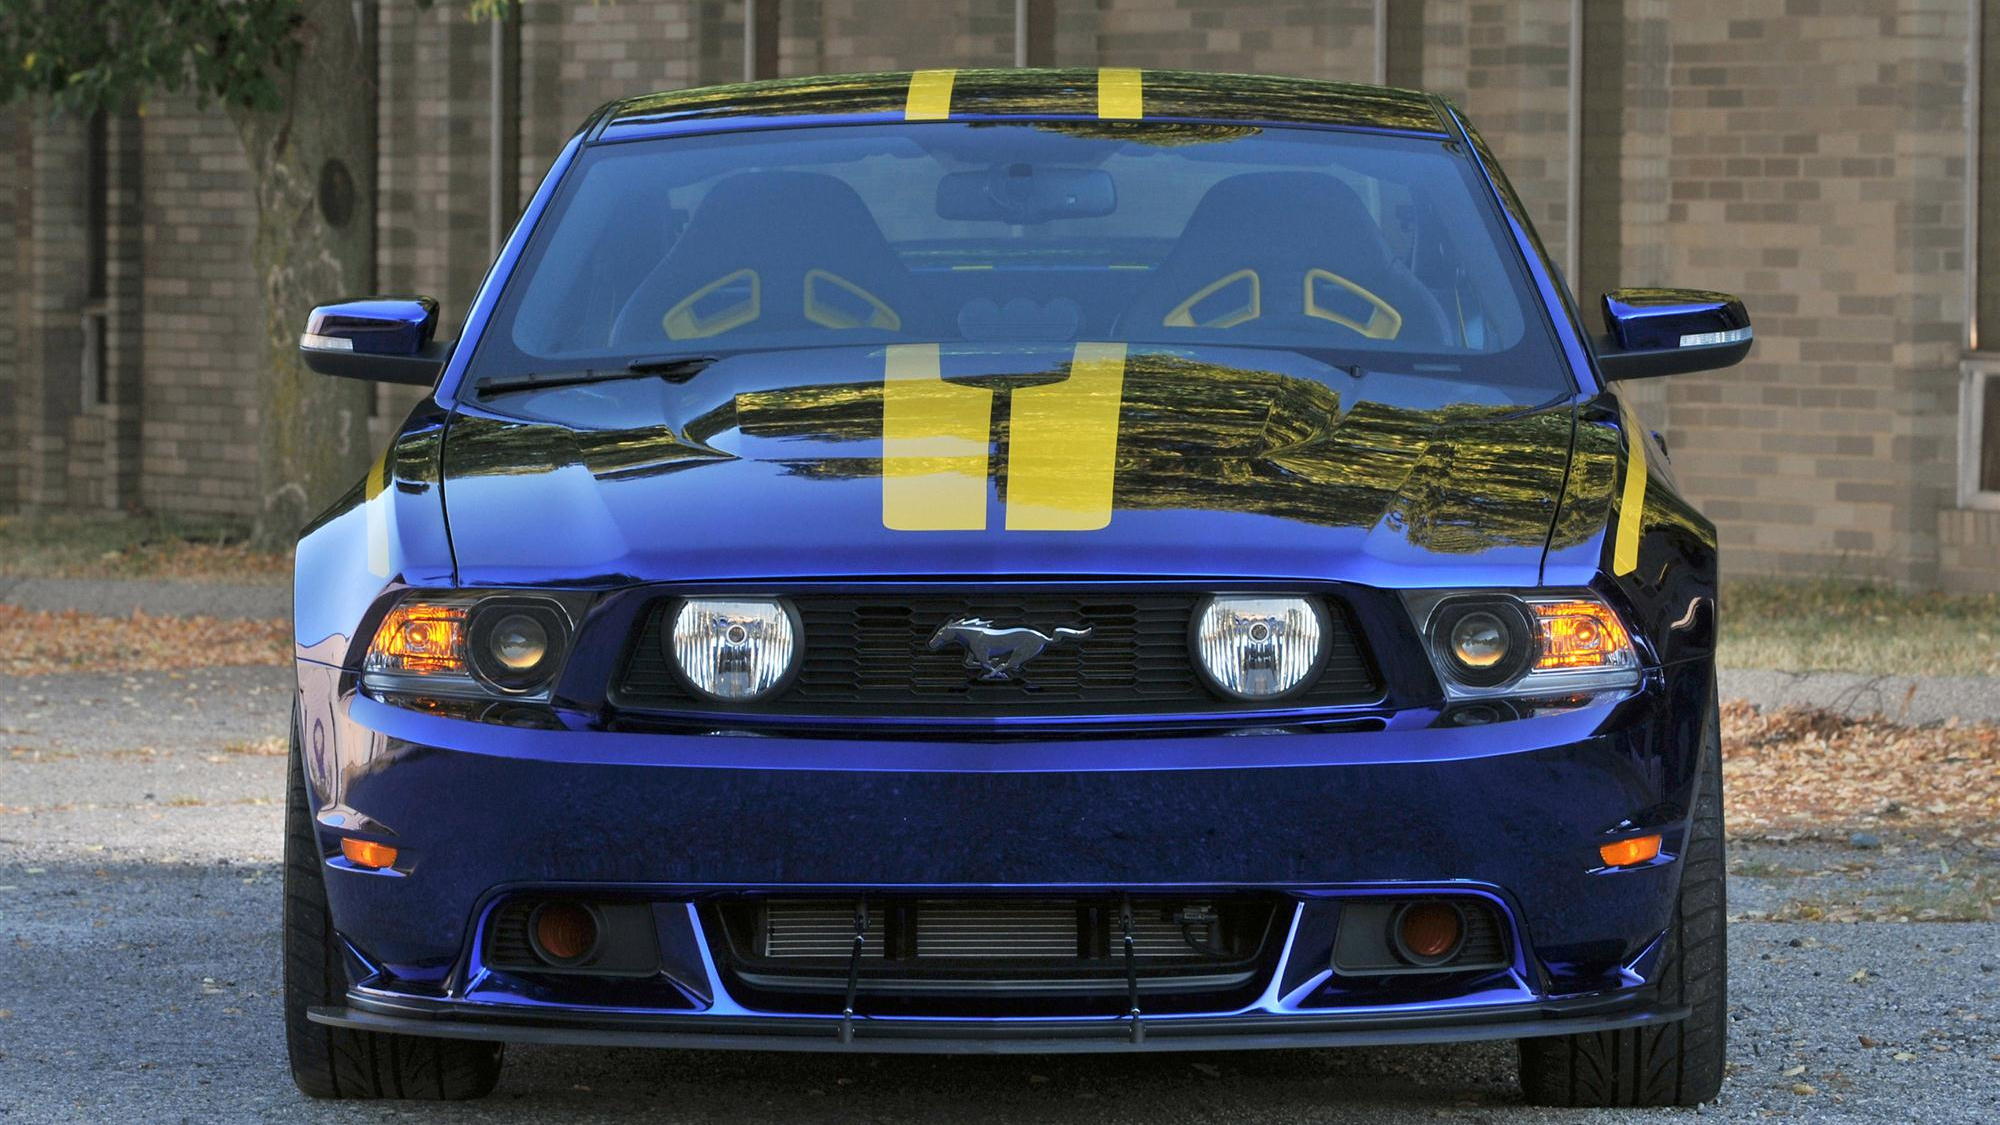 2012 Ford Mustang GT Blue Angels Edition